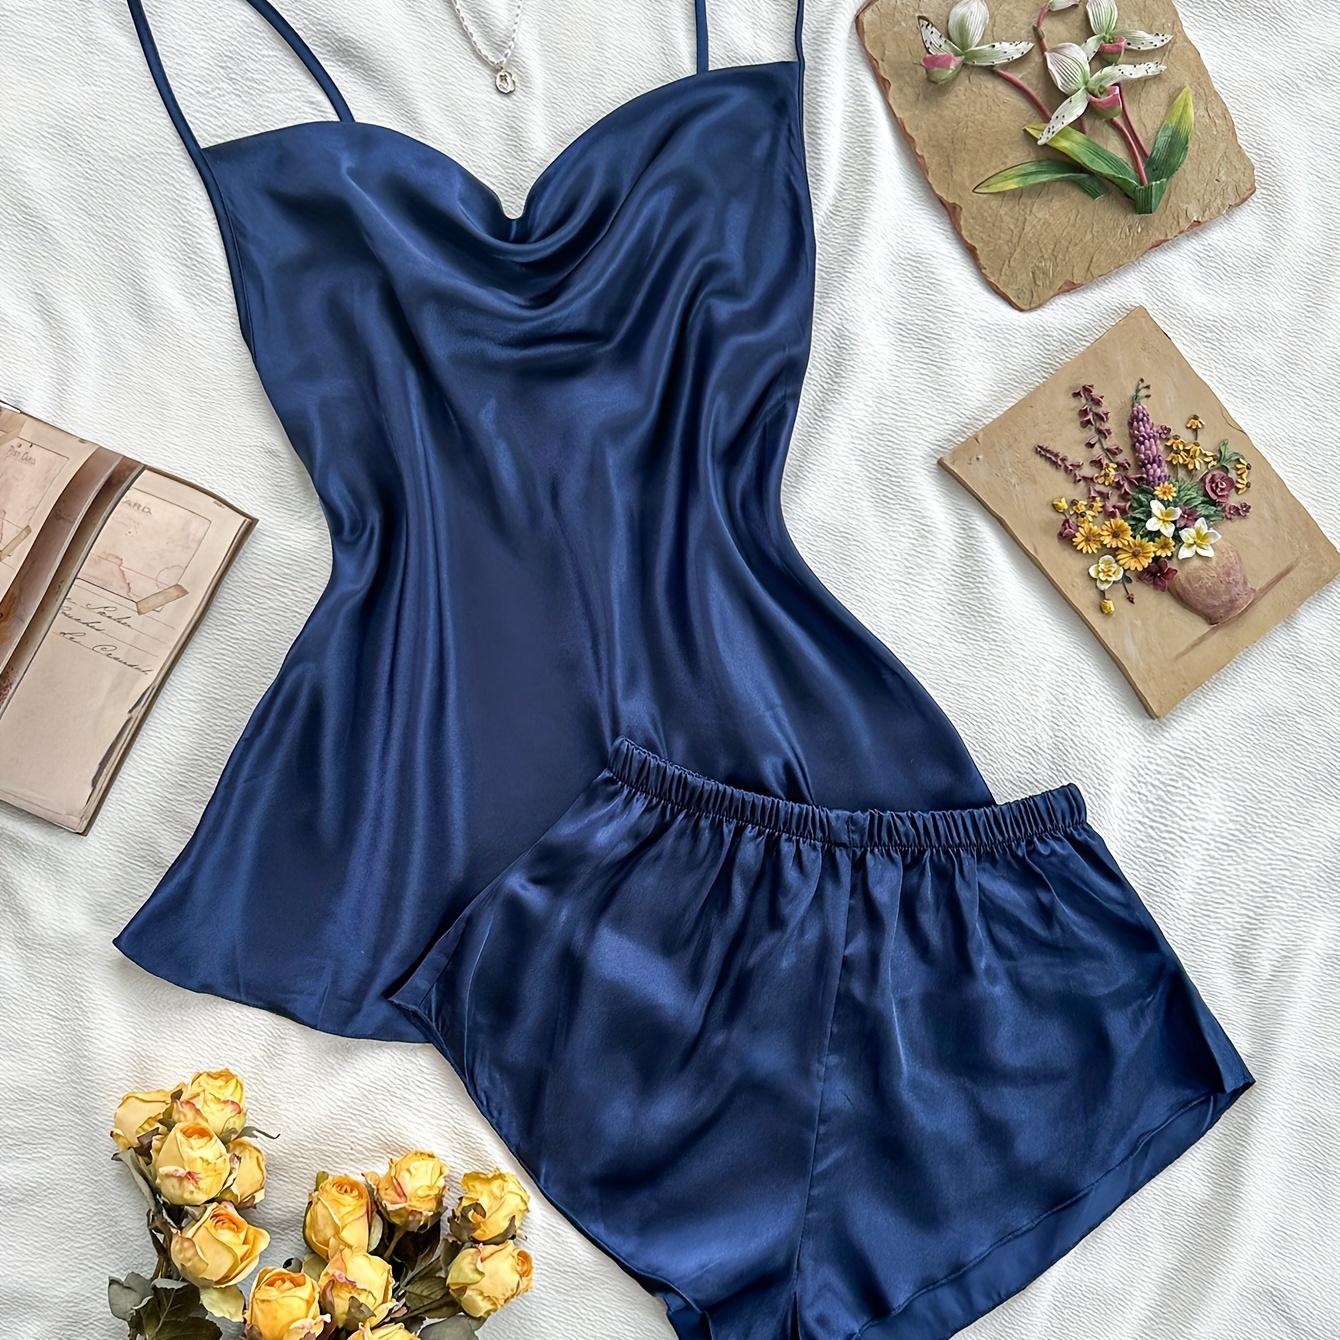 

Women's Sexy Solid Satin Pajama Set, Turtleneck Backless Cami Top & Shorts, Comfortable Relaxed Fit, Summer Nightwear